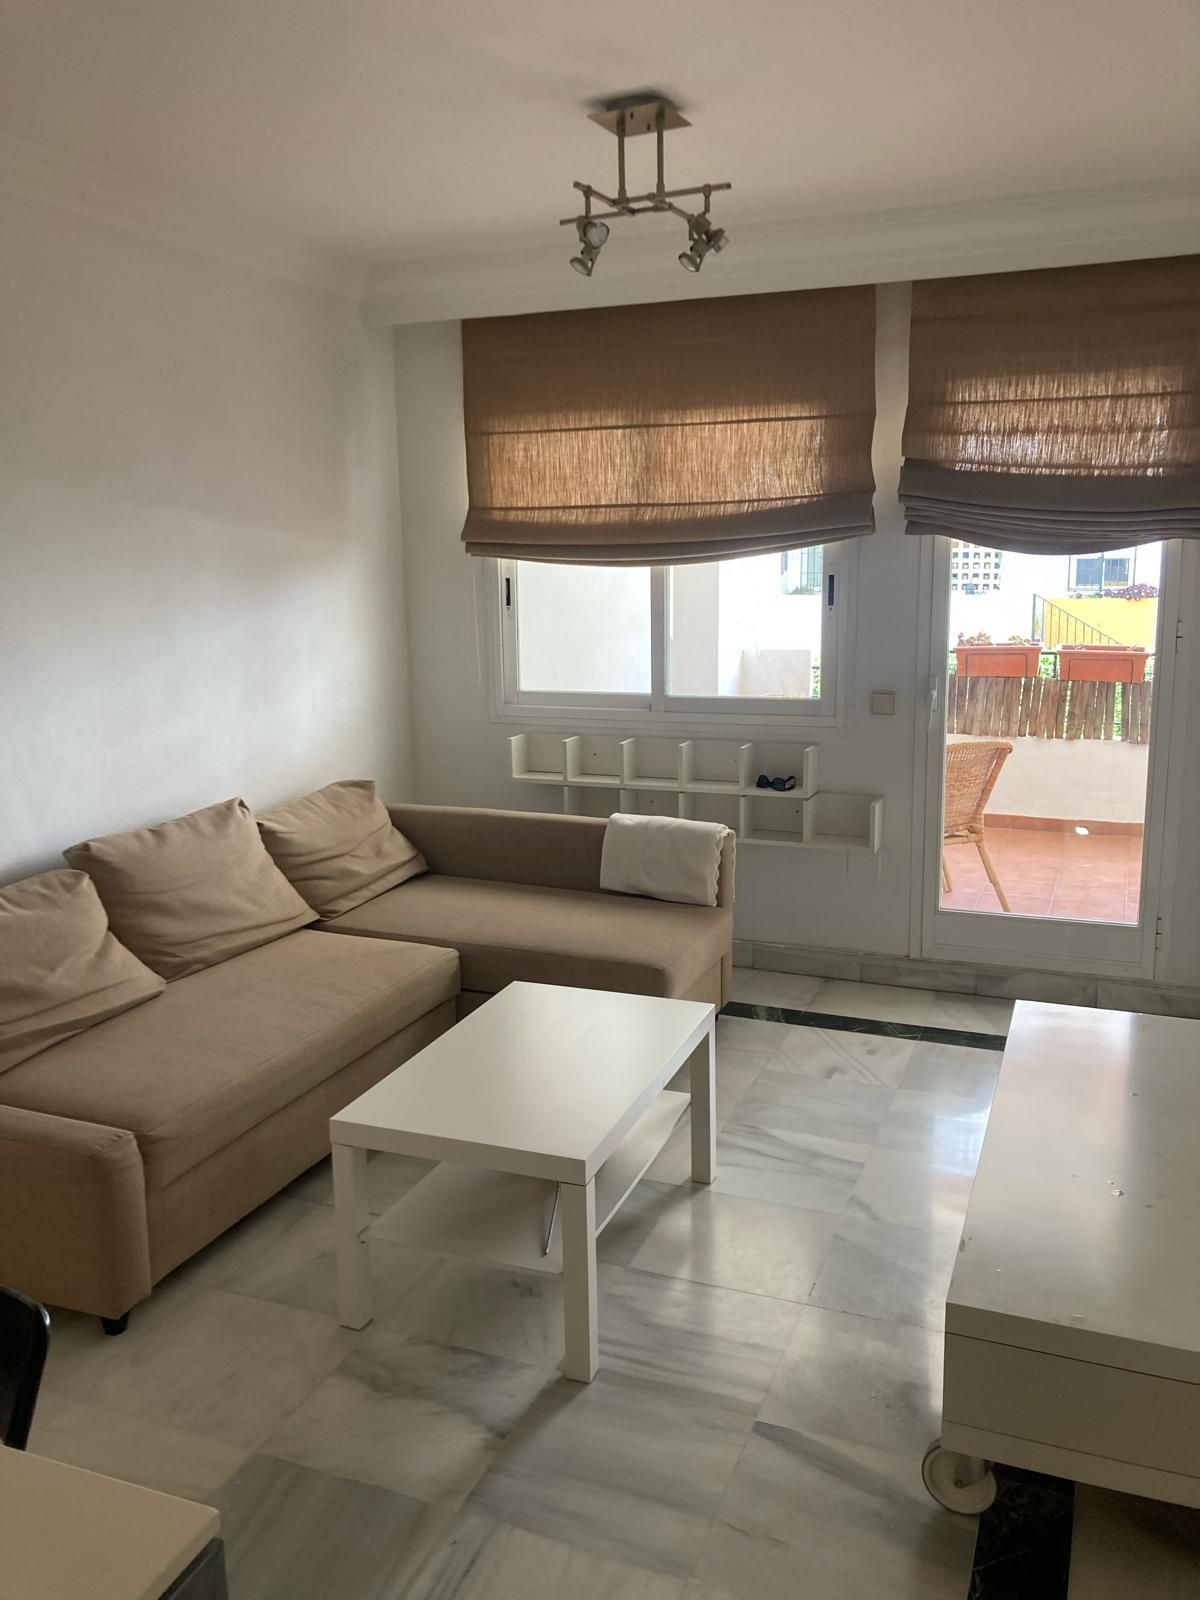 						Apartment  Middle Floor
																					for rent
																			 in Marbella
					